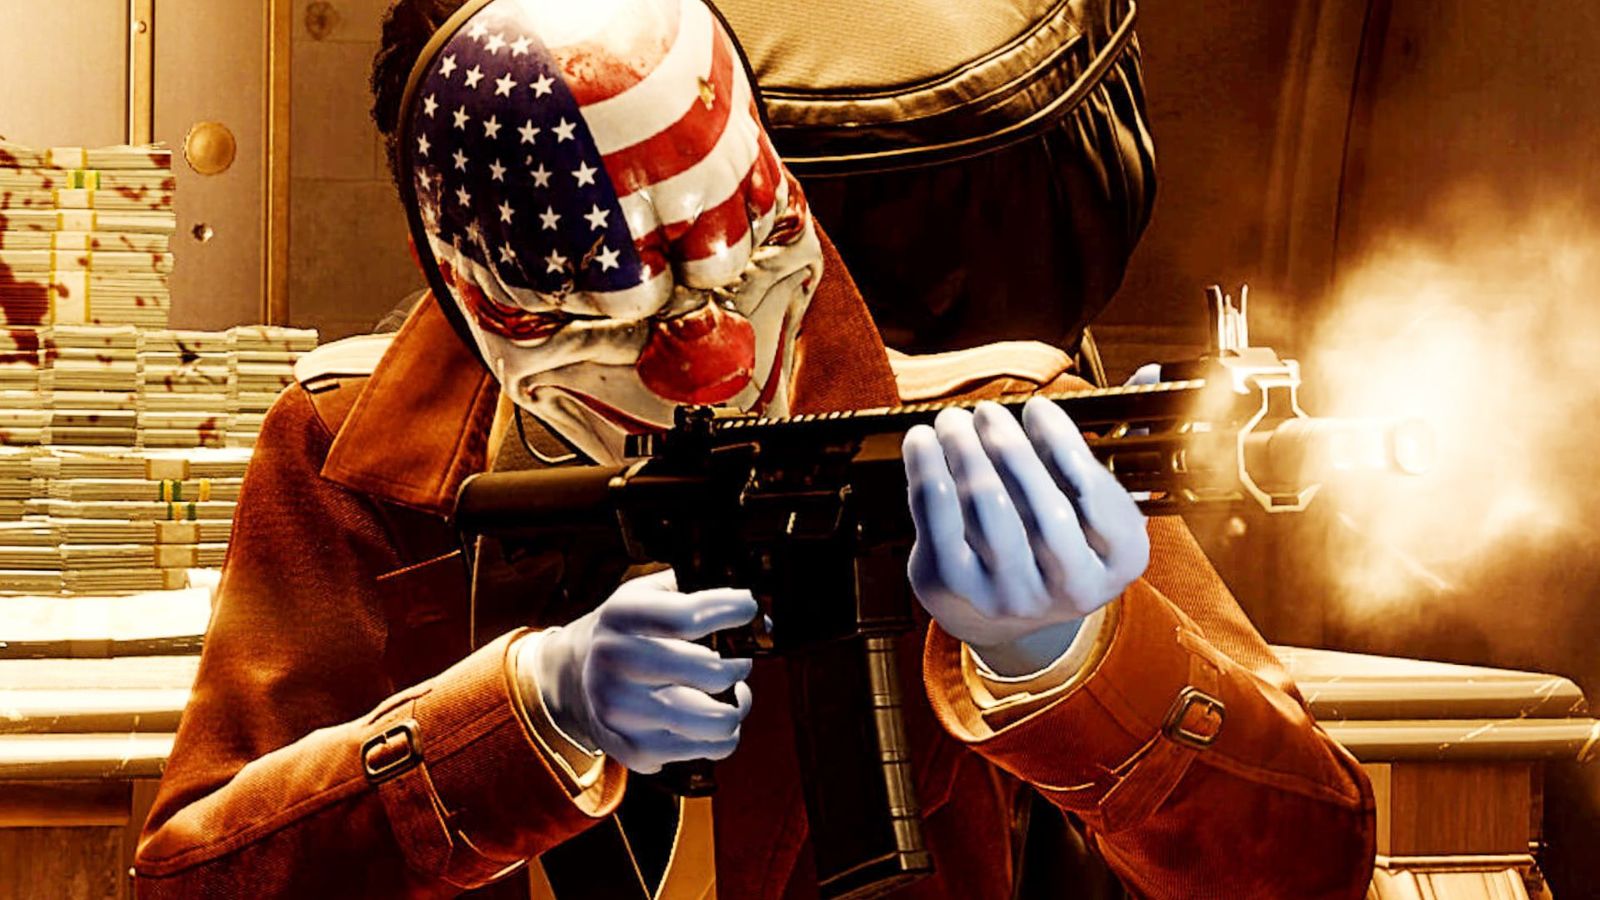 Payday 3 is unplayable on PS5 - a heist character firing an assault rifle in a vault 